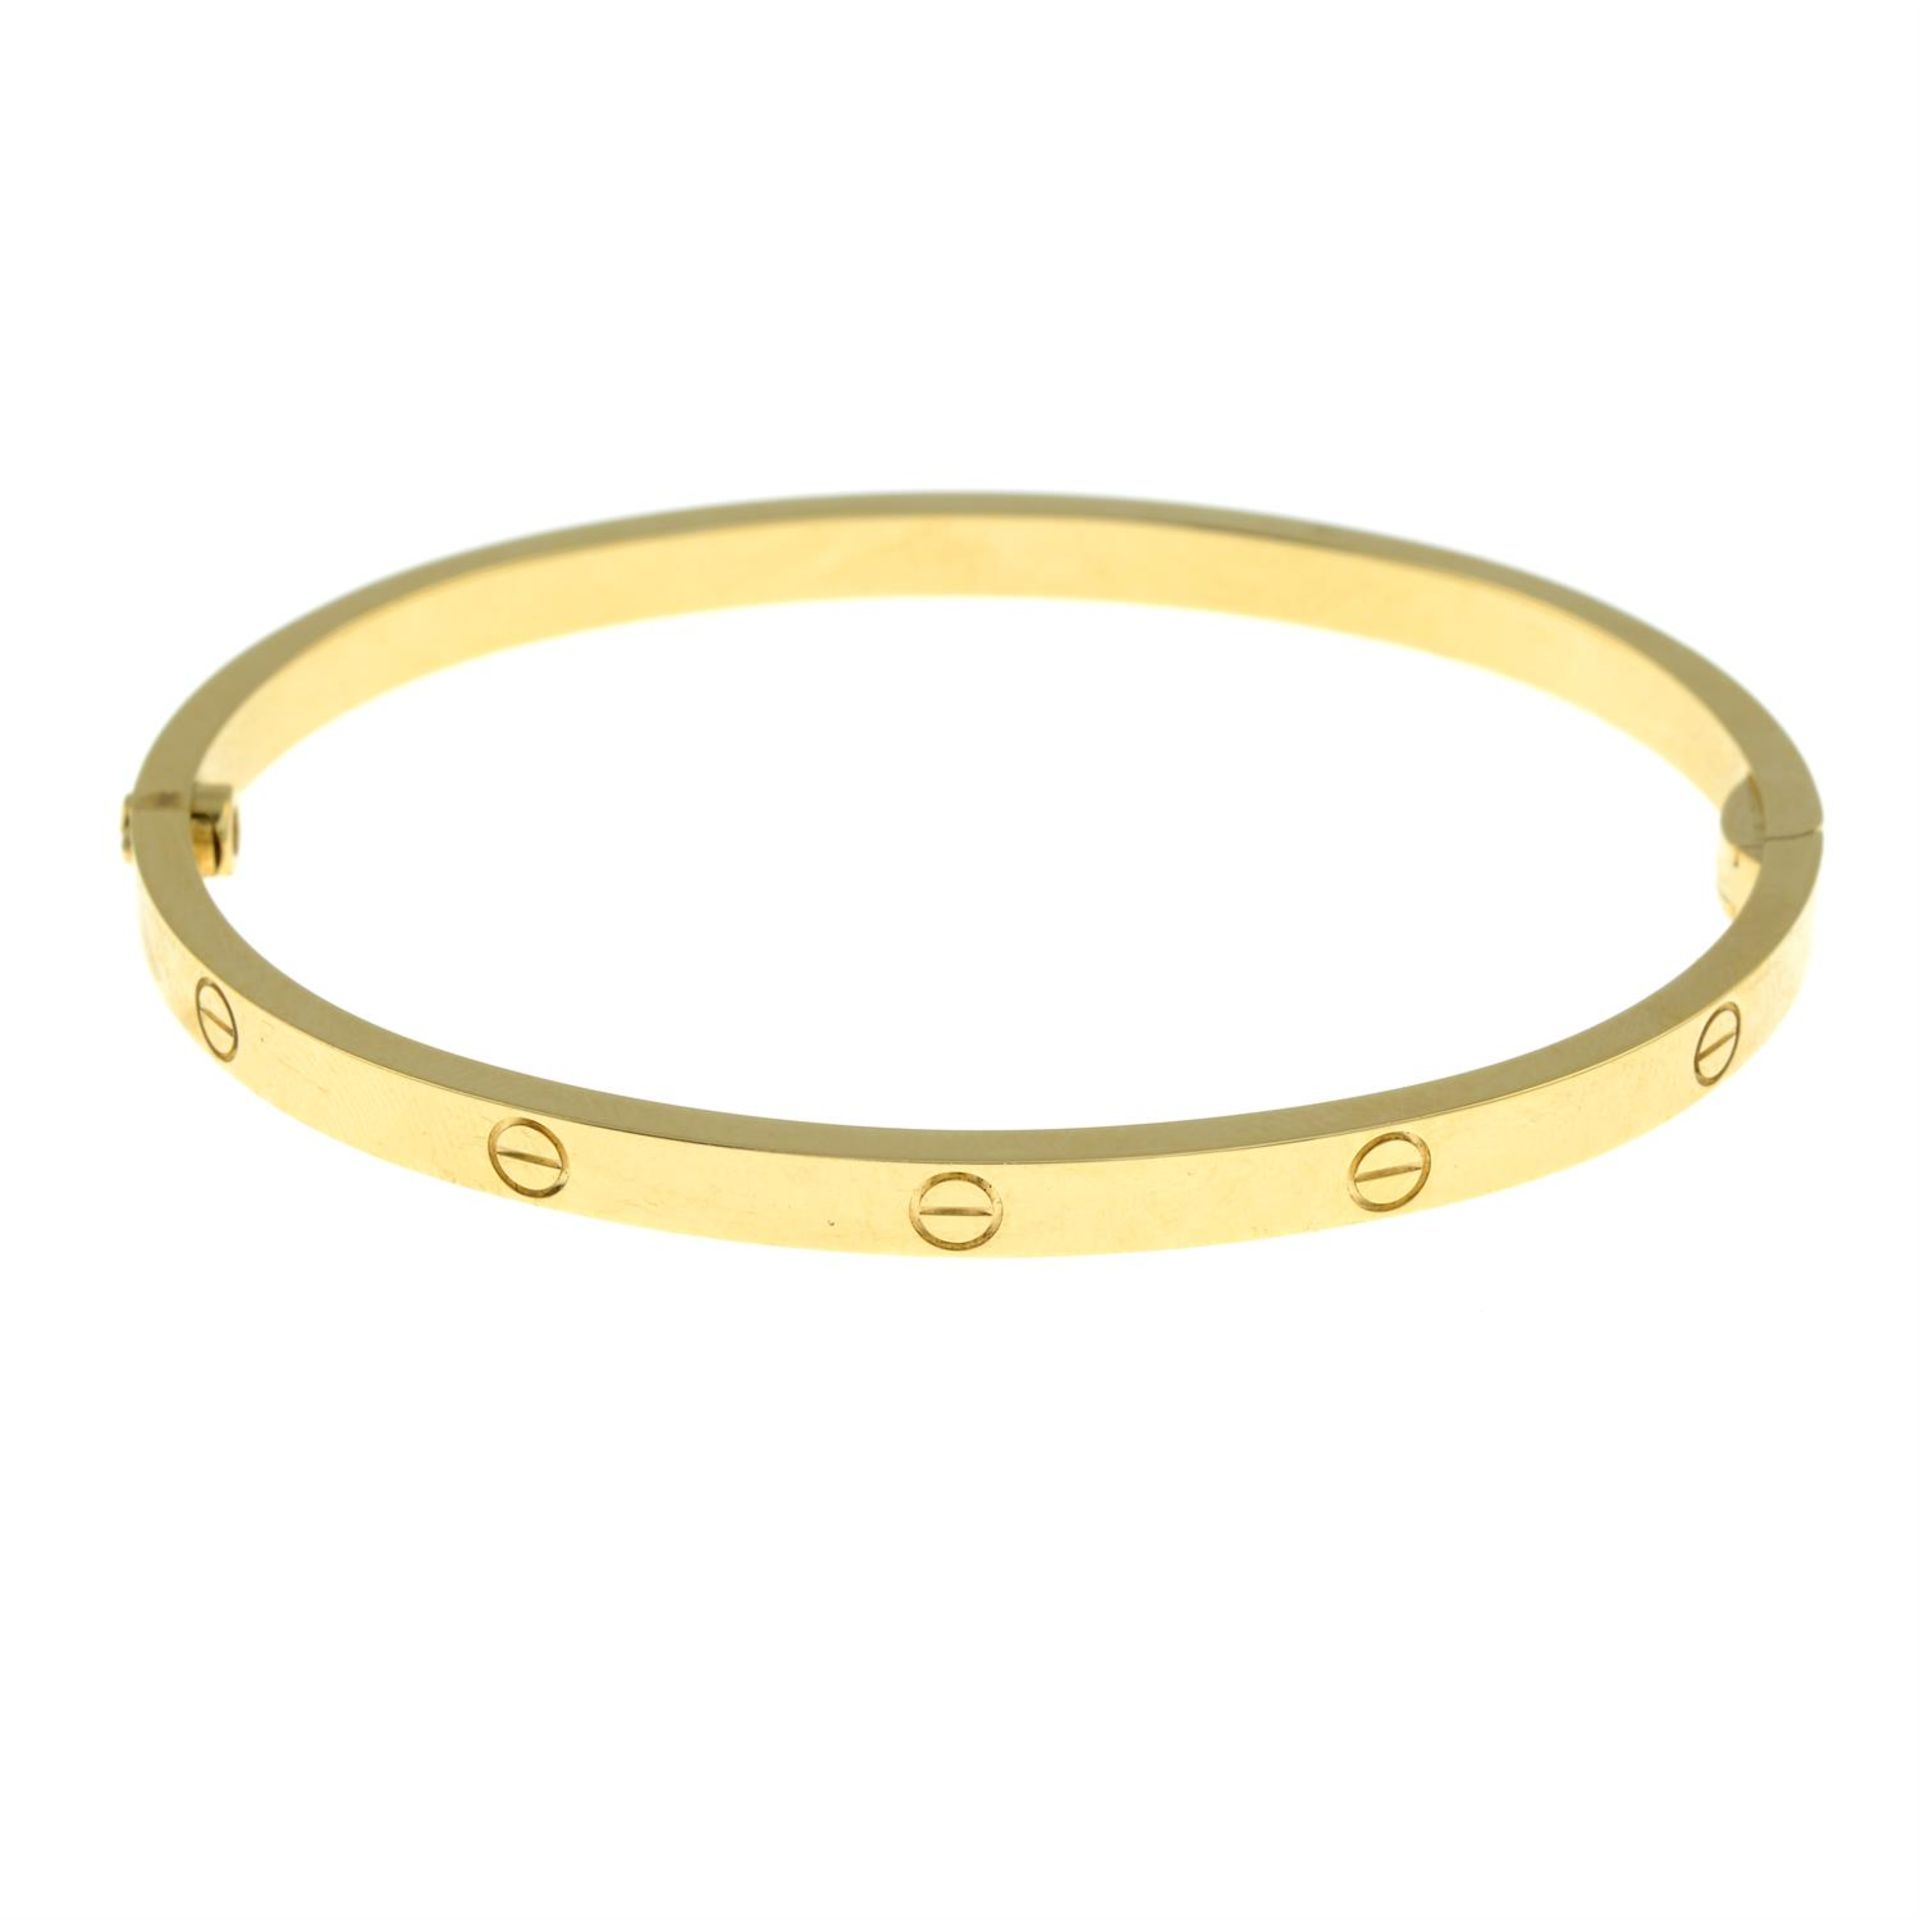 An 18ct gold 'Love' bangle, by Cartier. - Image 5 of 5